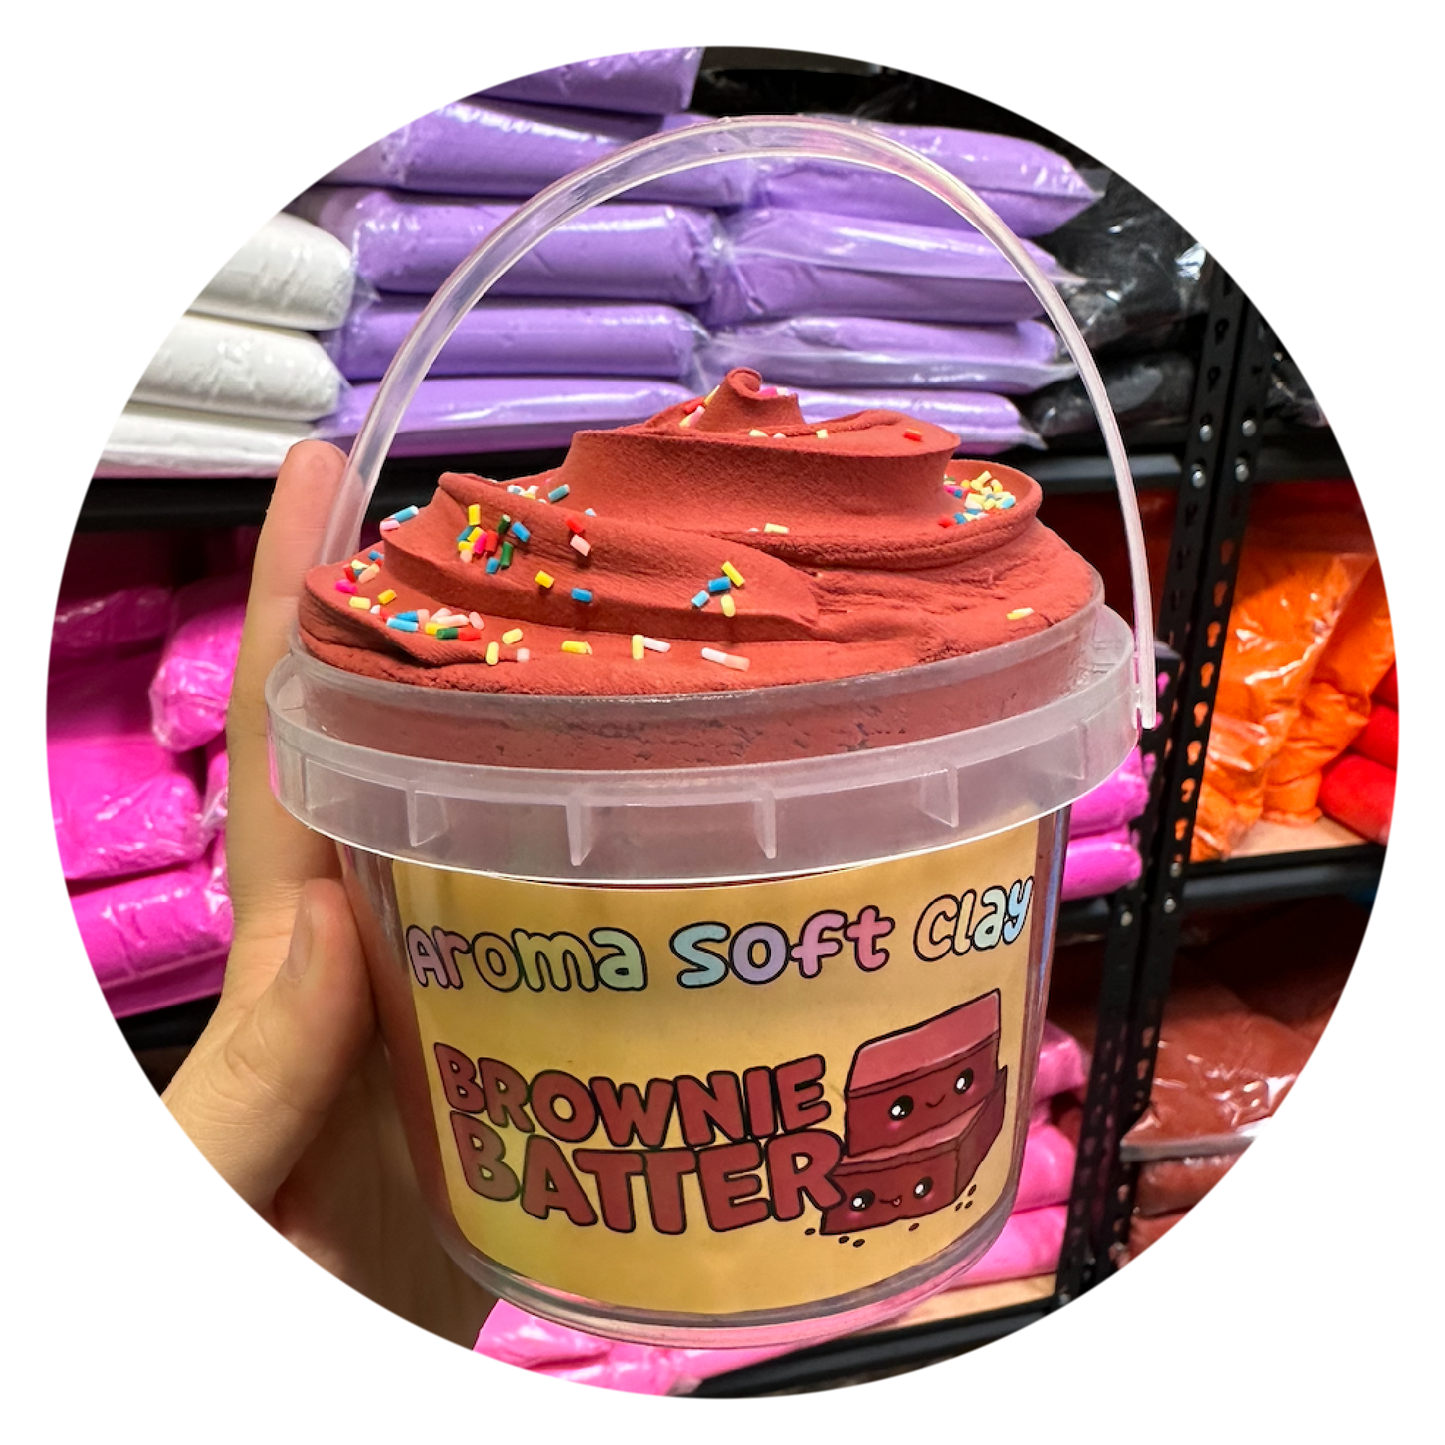 Aroma Soft Clay Brownie Batter